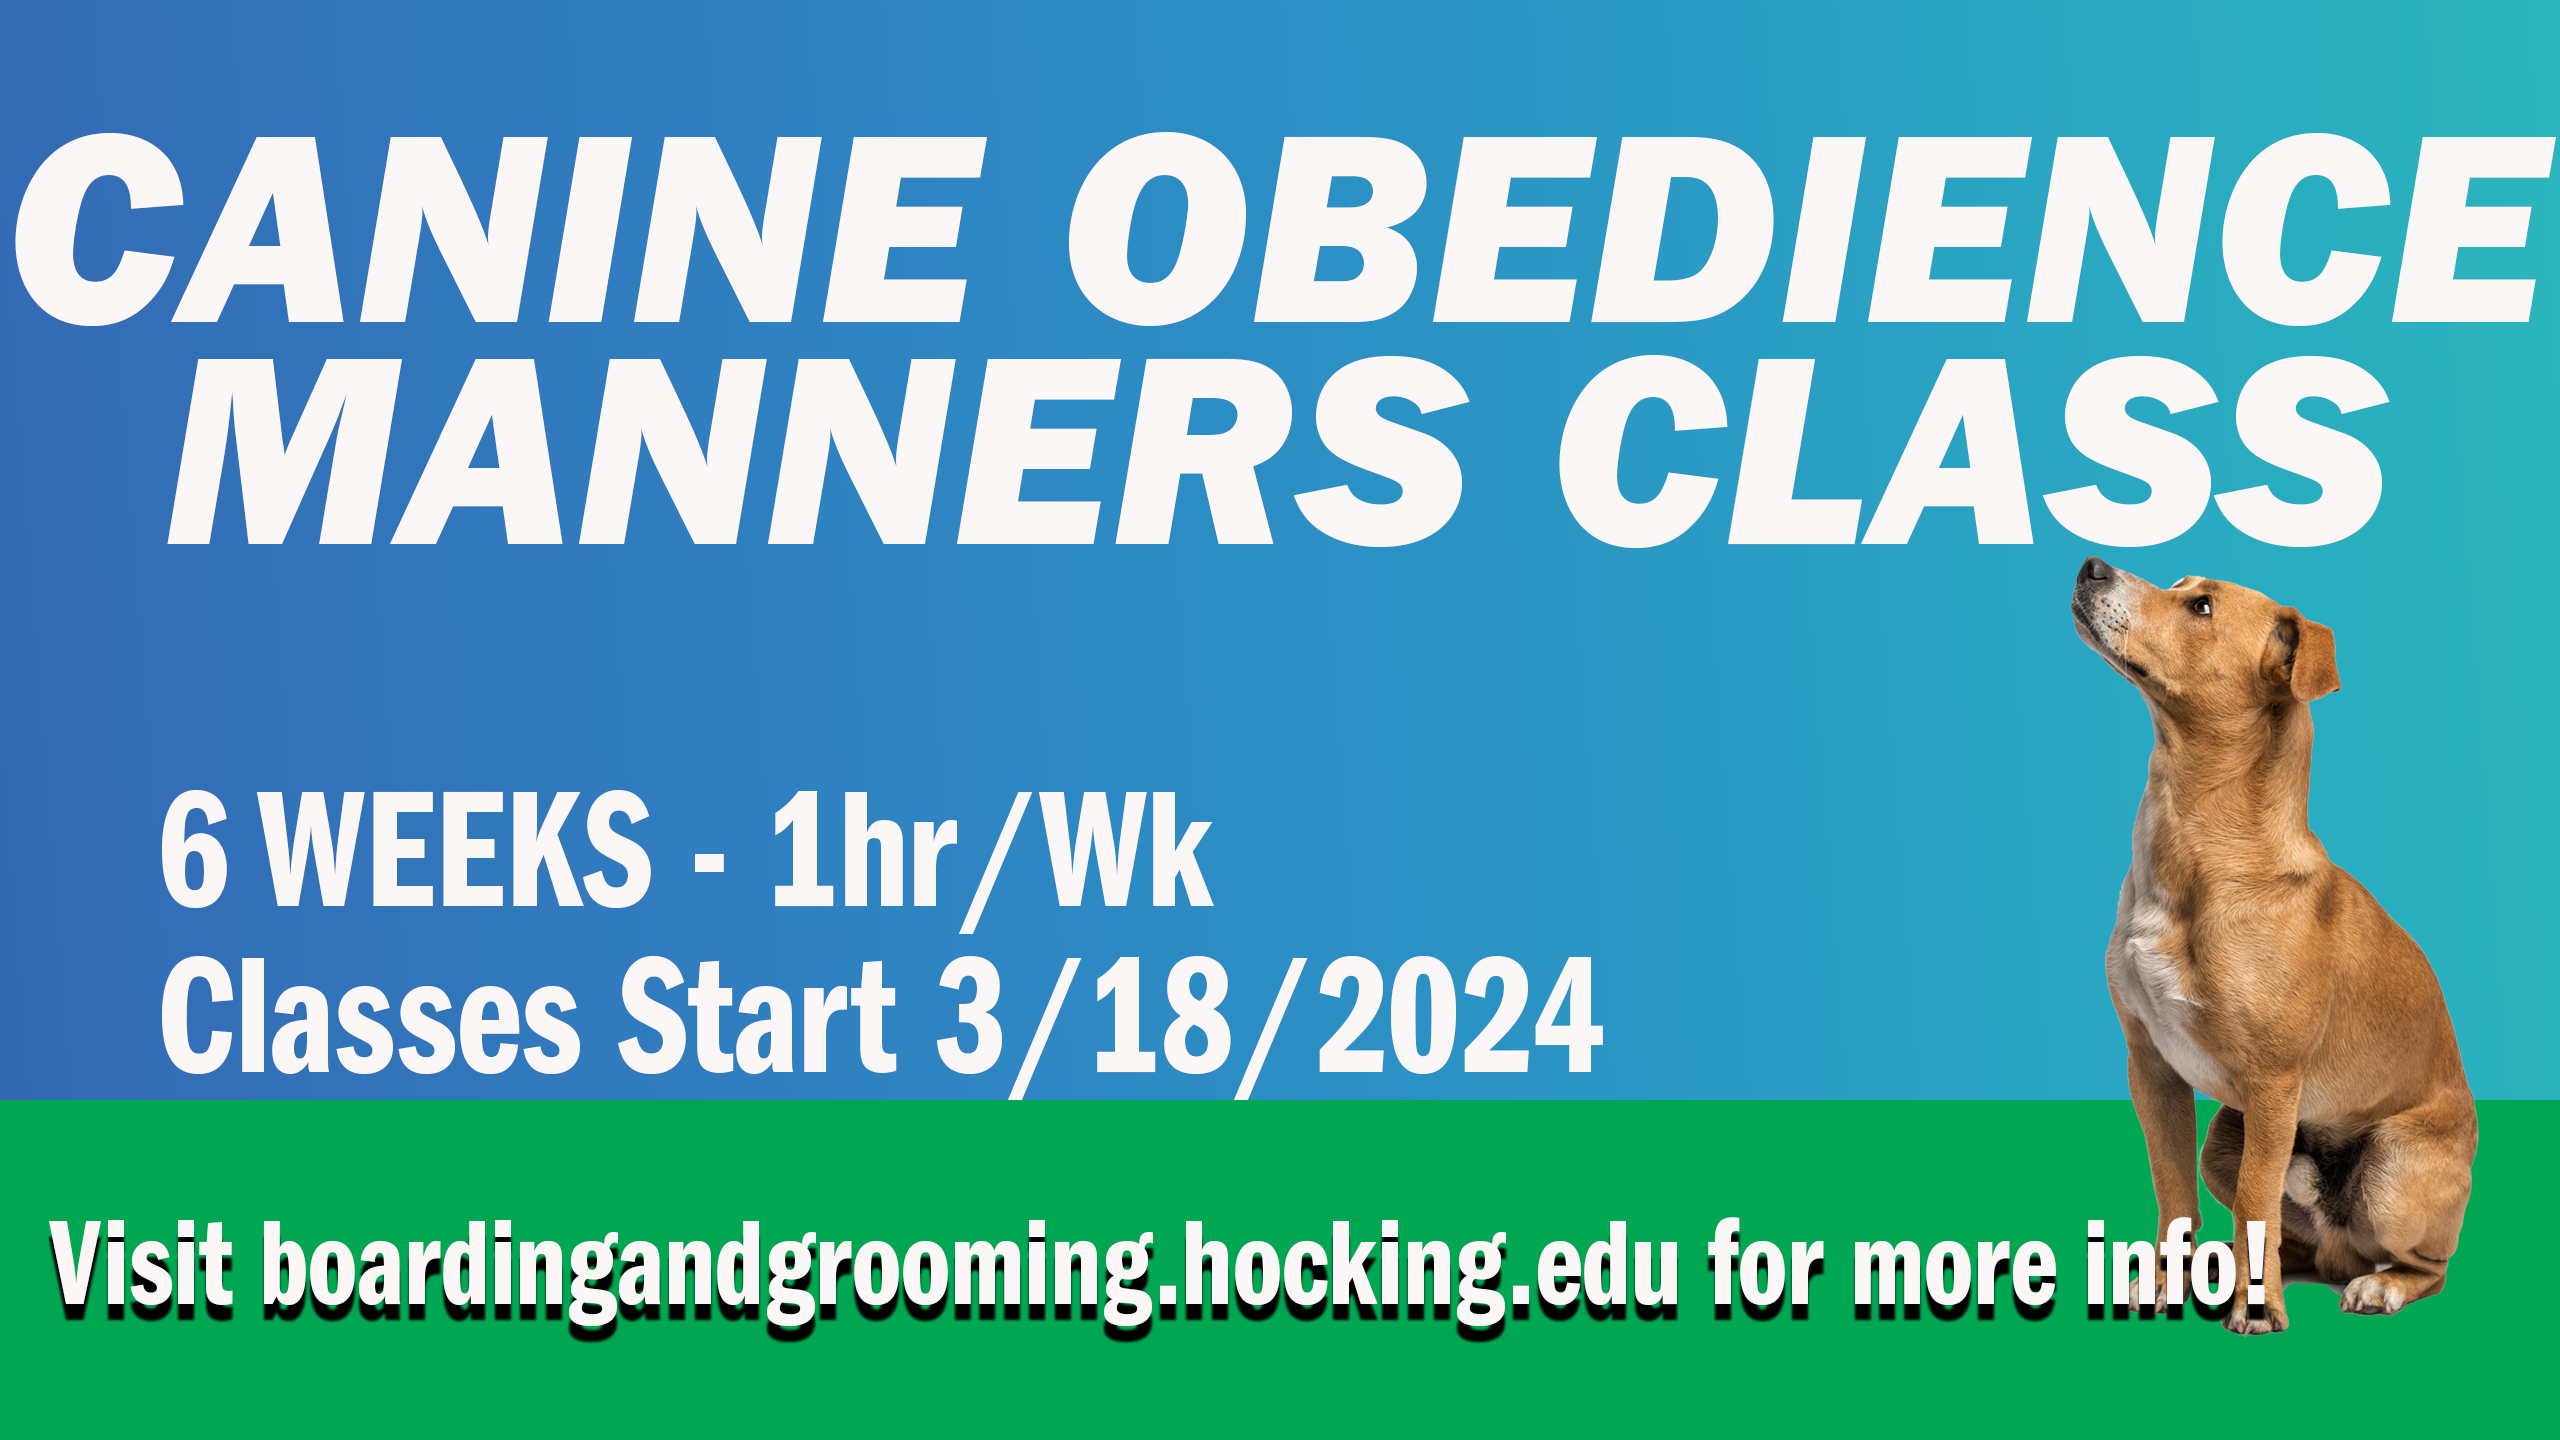 Enroll in the canine obedience manners class at Hocking!